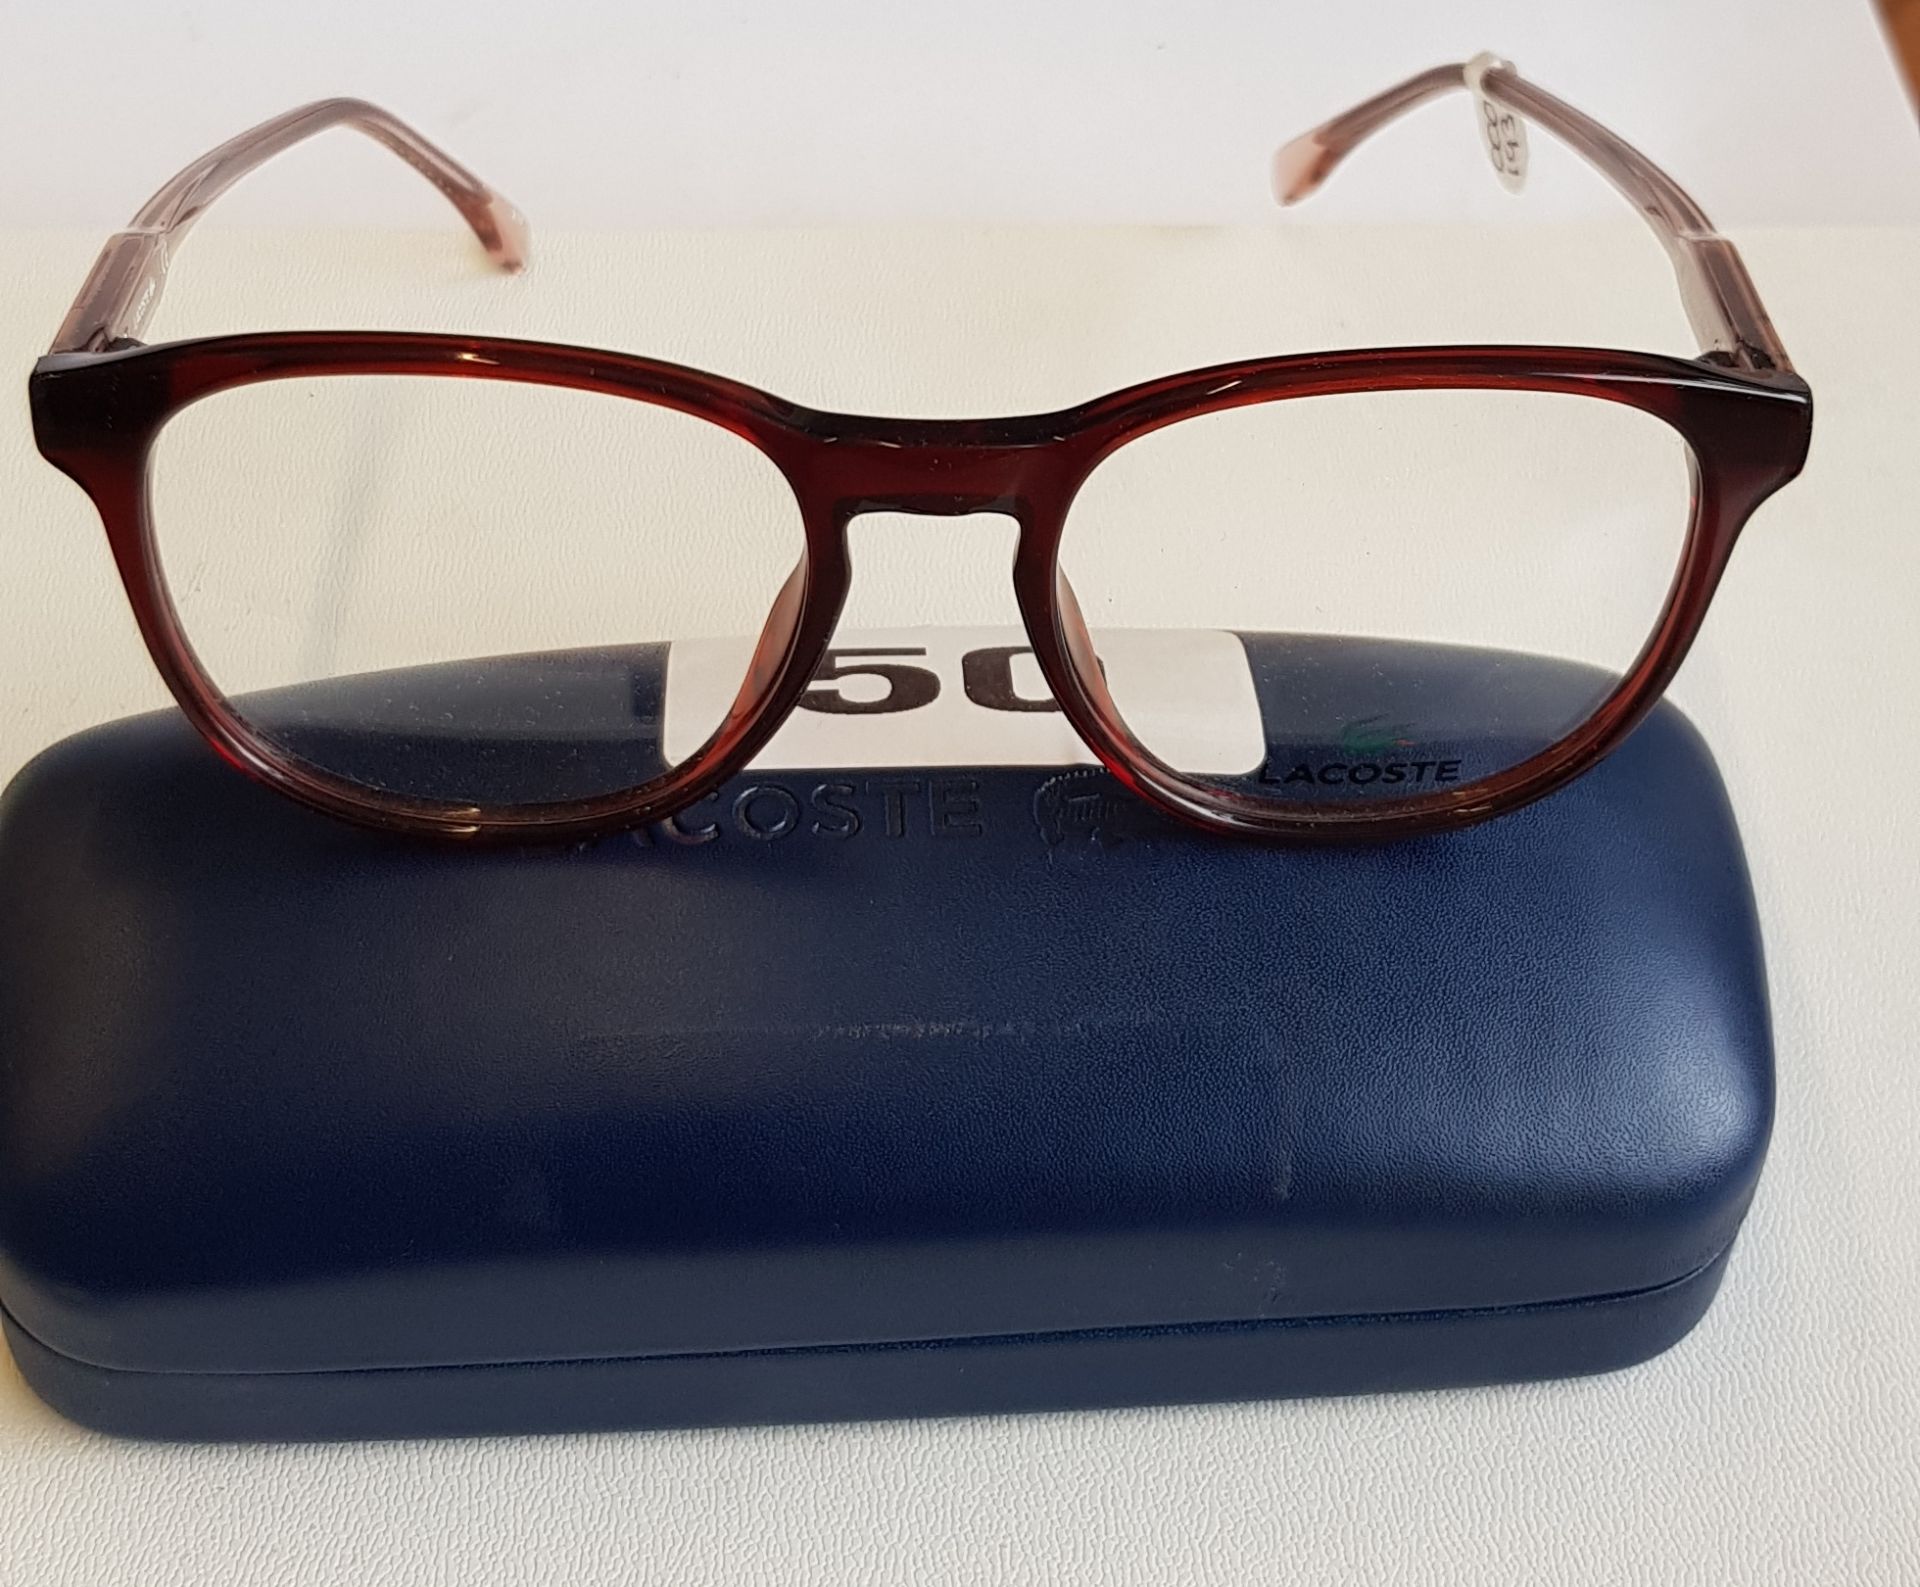 1 x Pair of Lacoste reading glasses